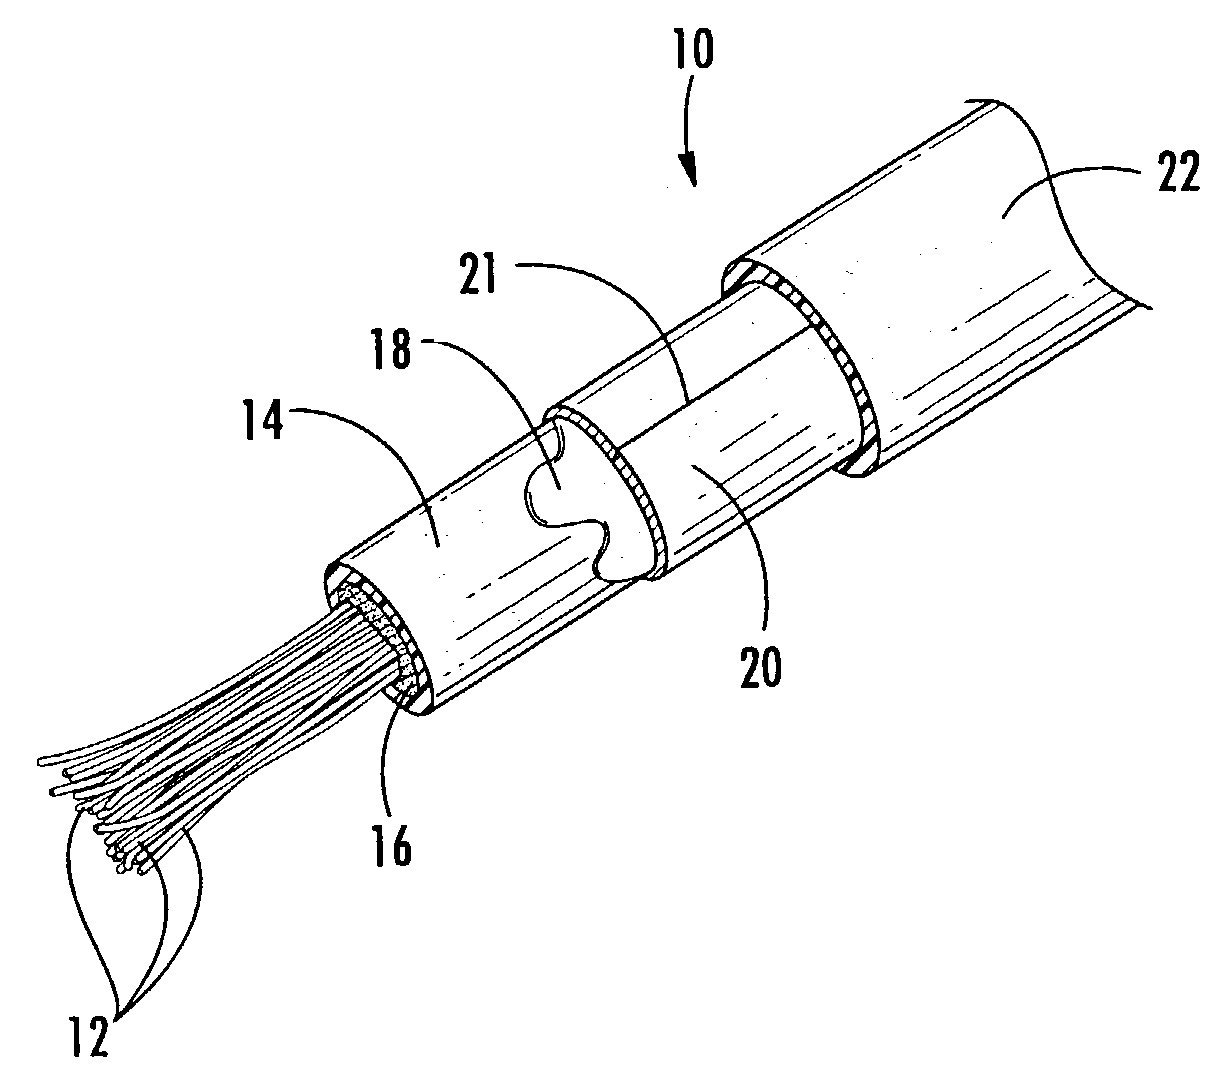 Fiber optic cable with composite polymeric/metallic armor